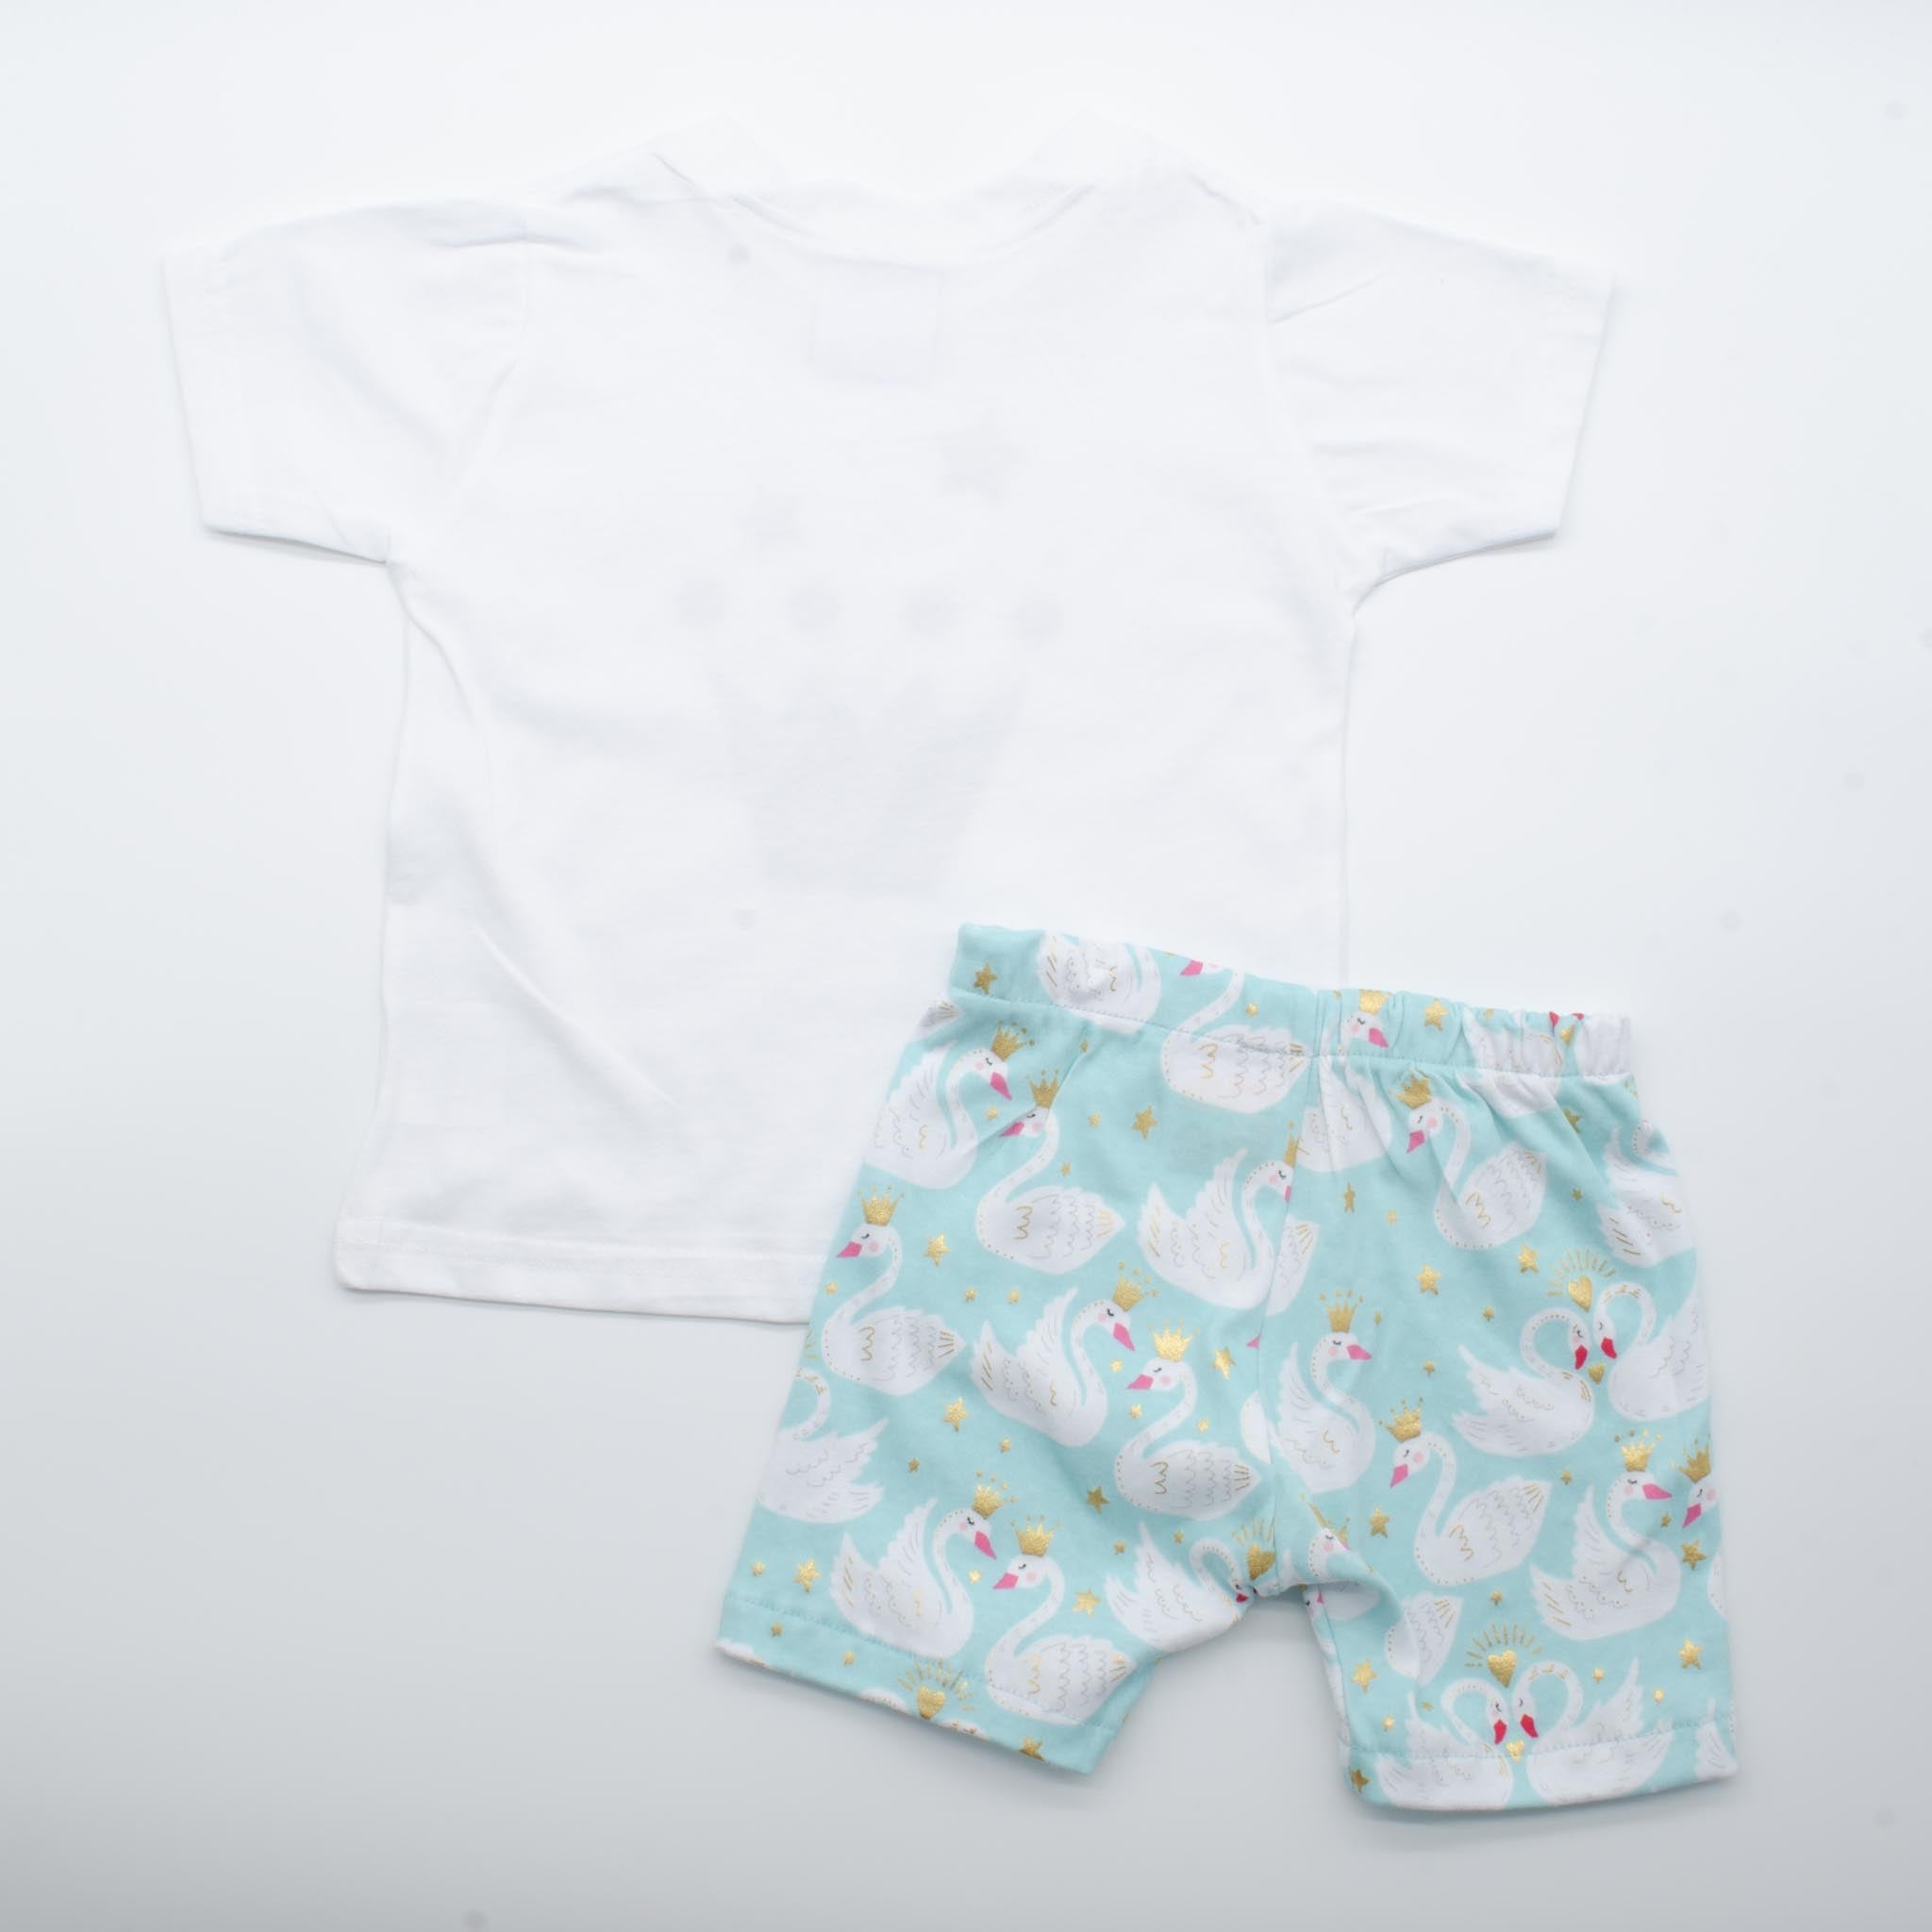 Swan Magic Outifit for Baby